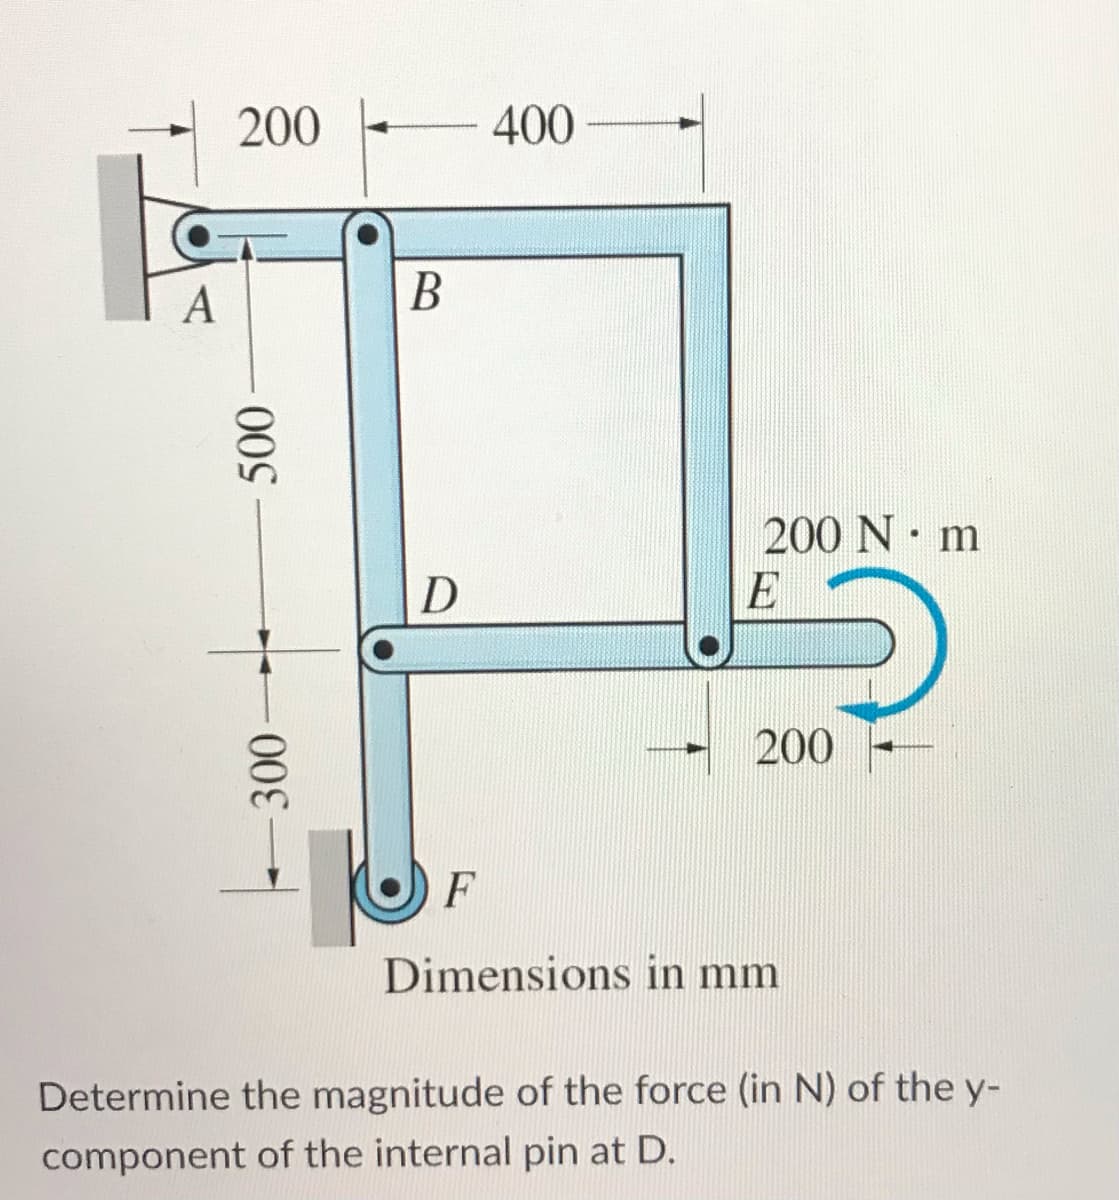 200 -
400
A
В
200 N m
D
200
F
Dimensions in mm
Determine the magnitude of the force (in N) of the y-
component of the internal pin at D.
500
